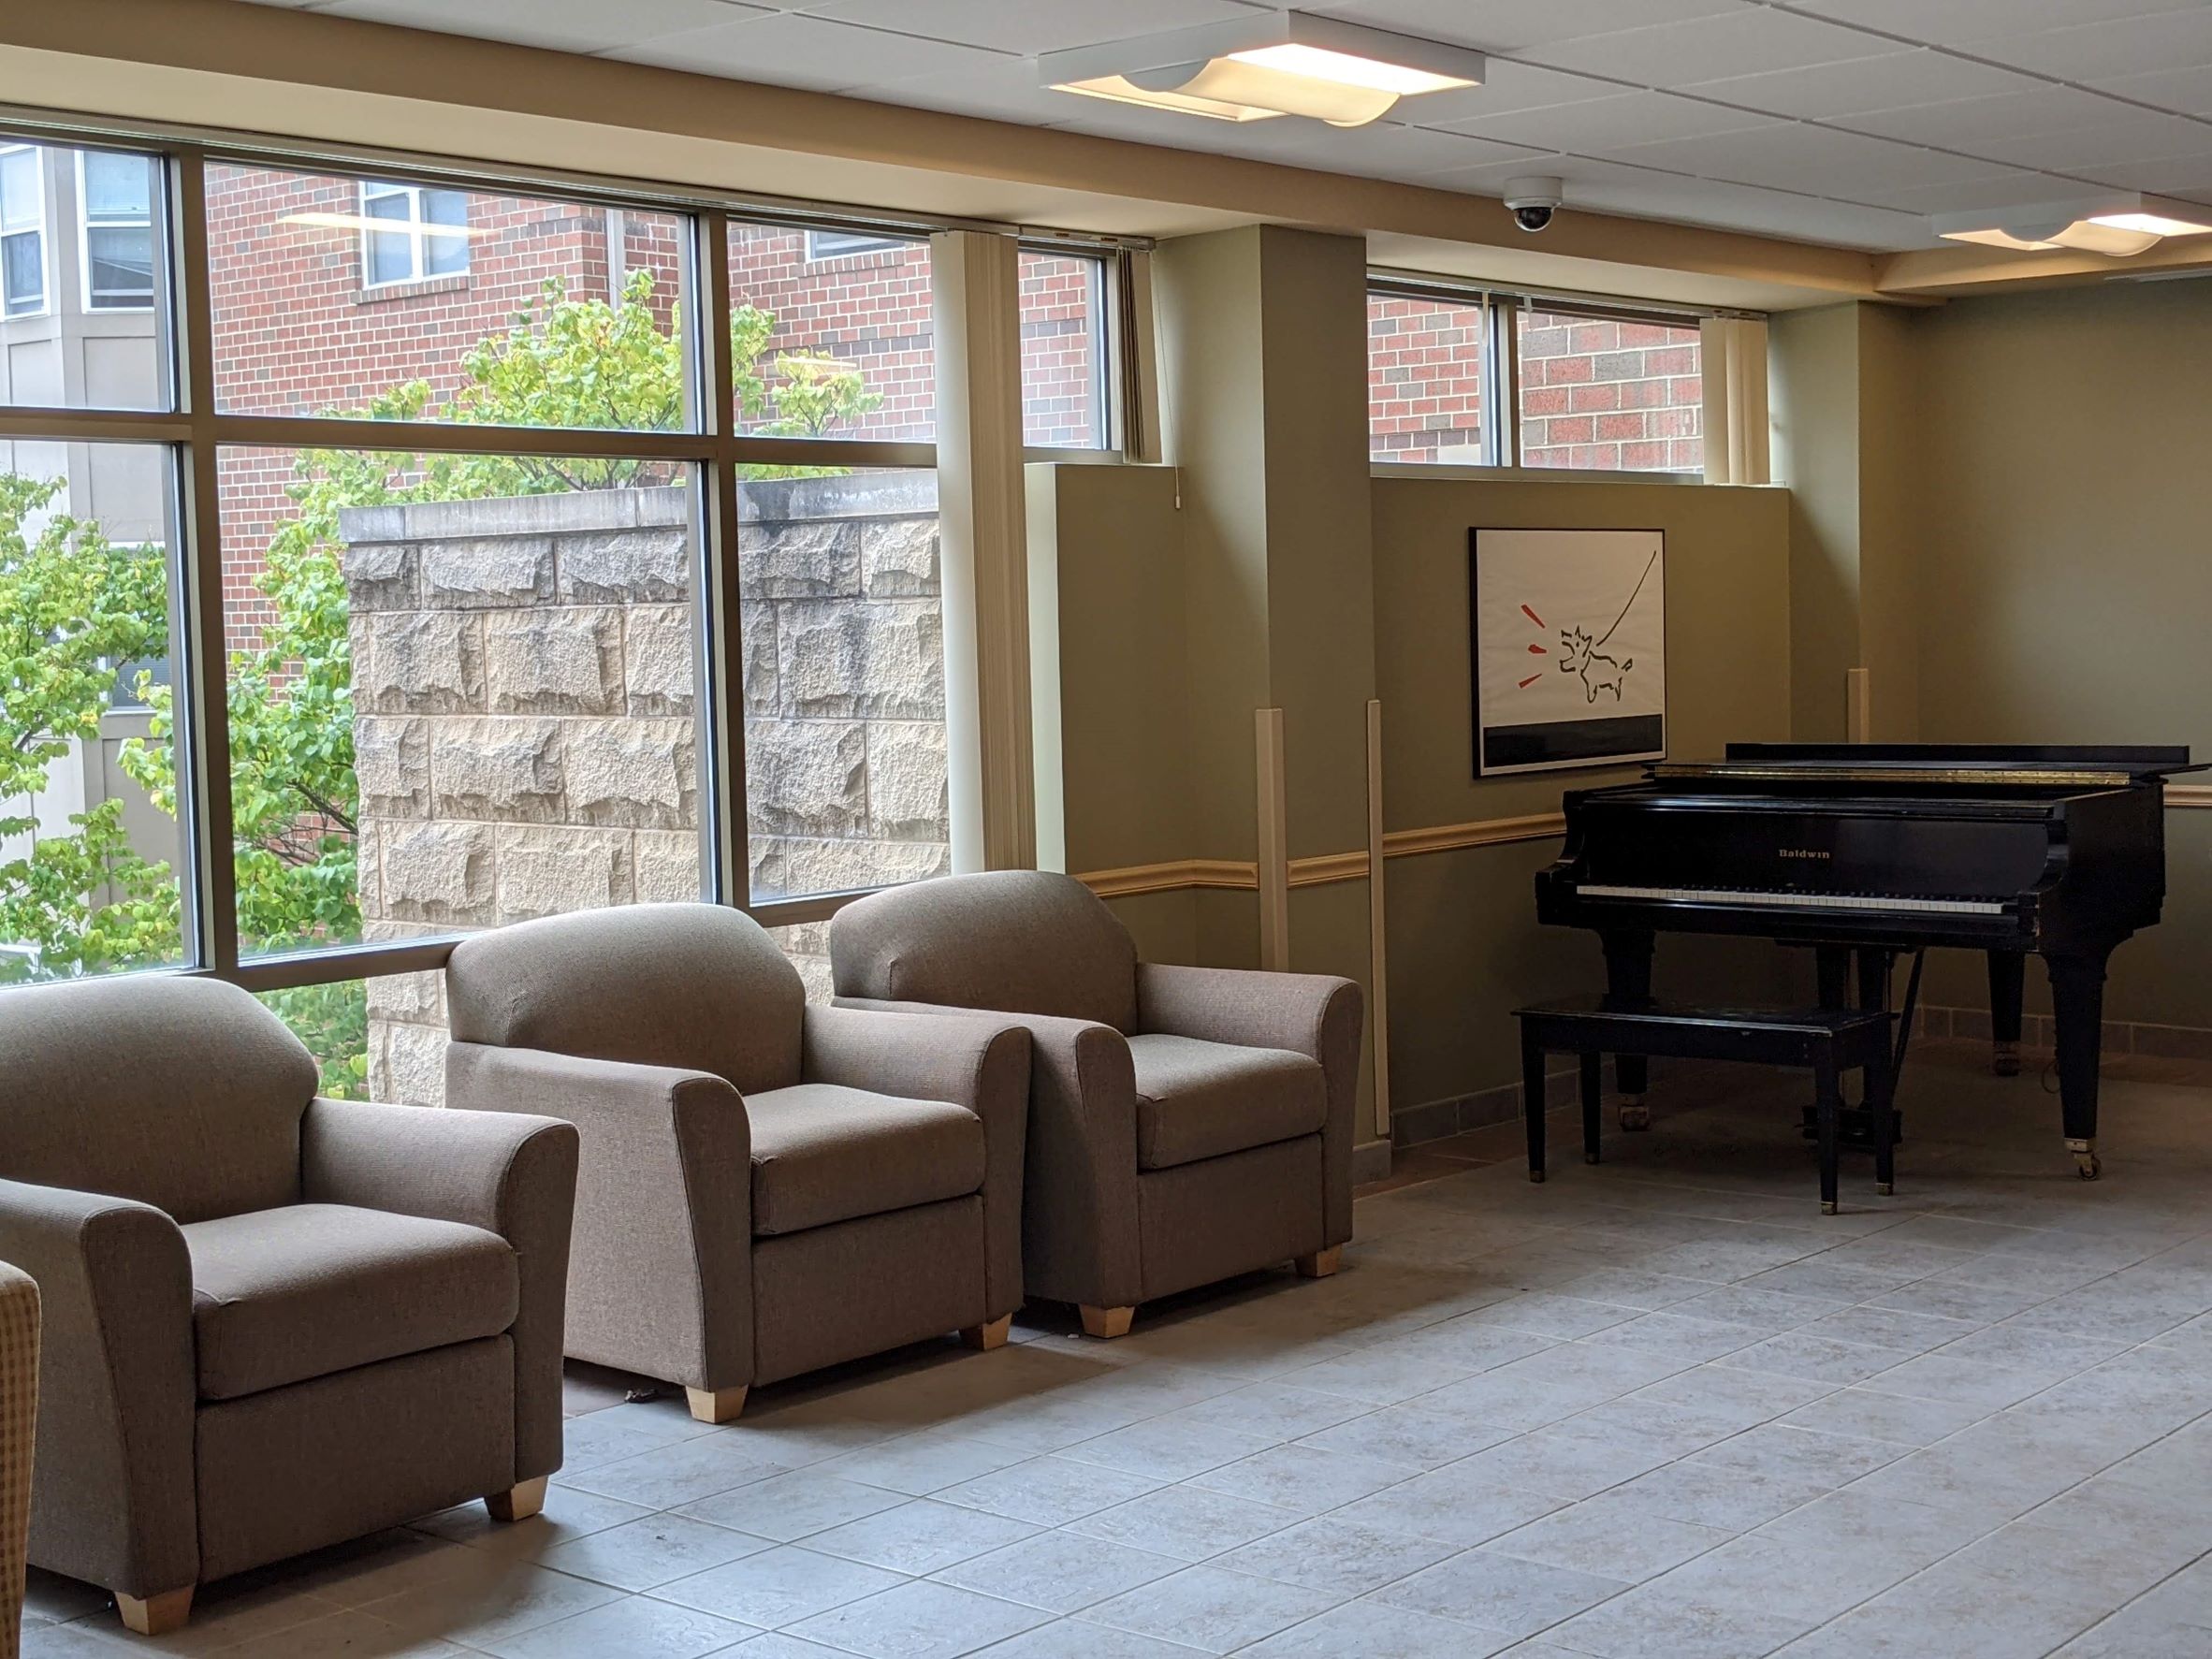 Living-Learning Dormitory Community lounge with large cushy chairs and a baby grand piano in the background with a large glass window and stone wall with vegetation beyond